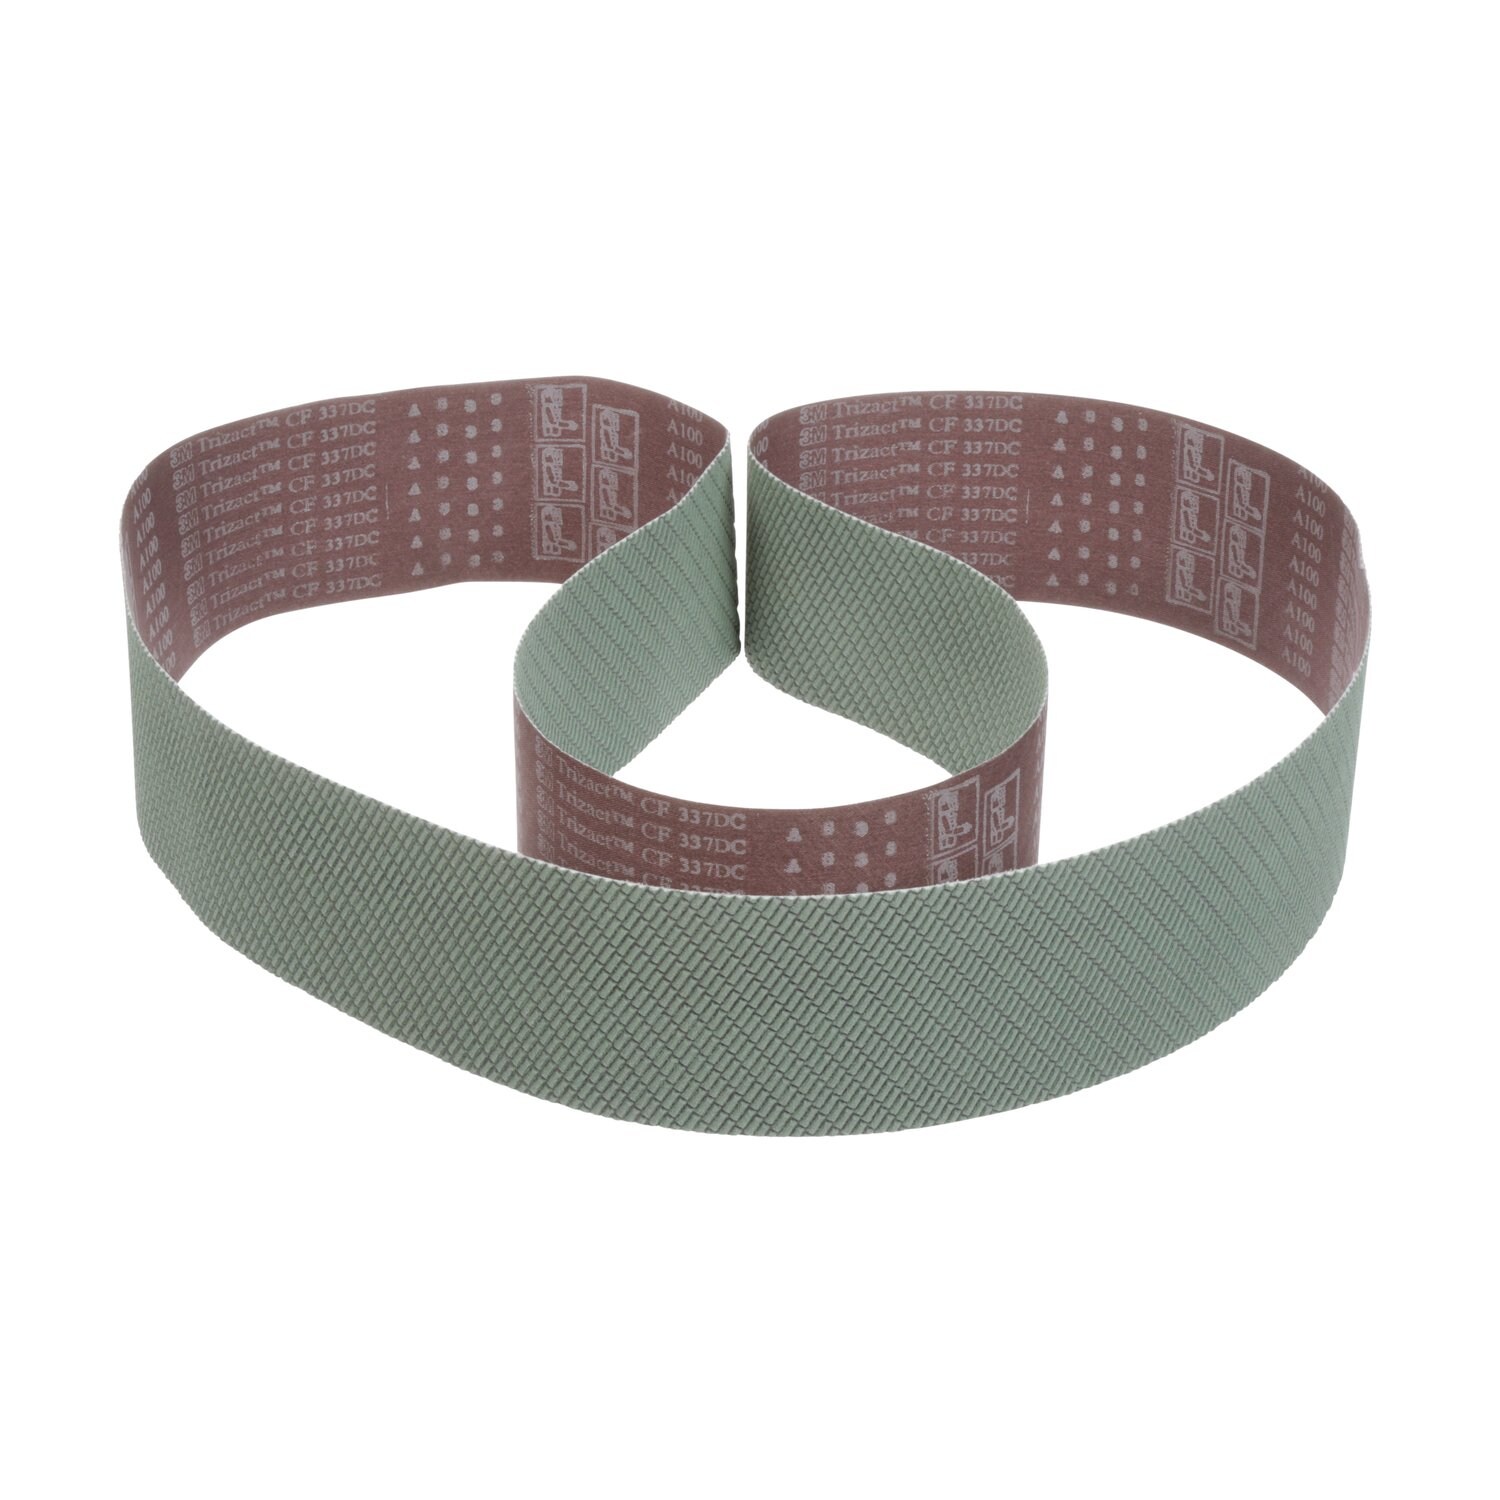 7100052831 - 3M Trizact Cloth Belt 337DC, A30 X-weight, Config